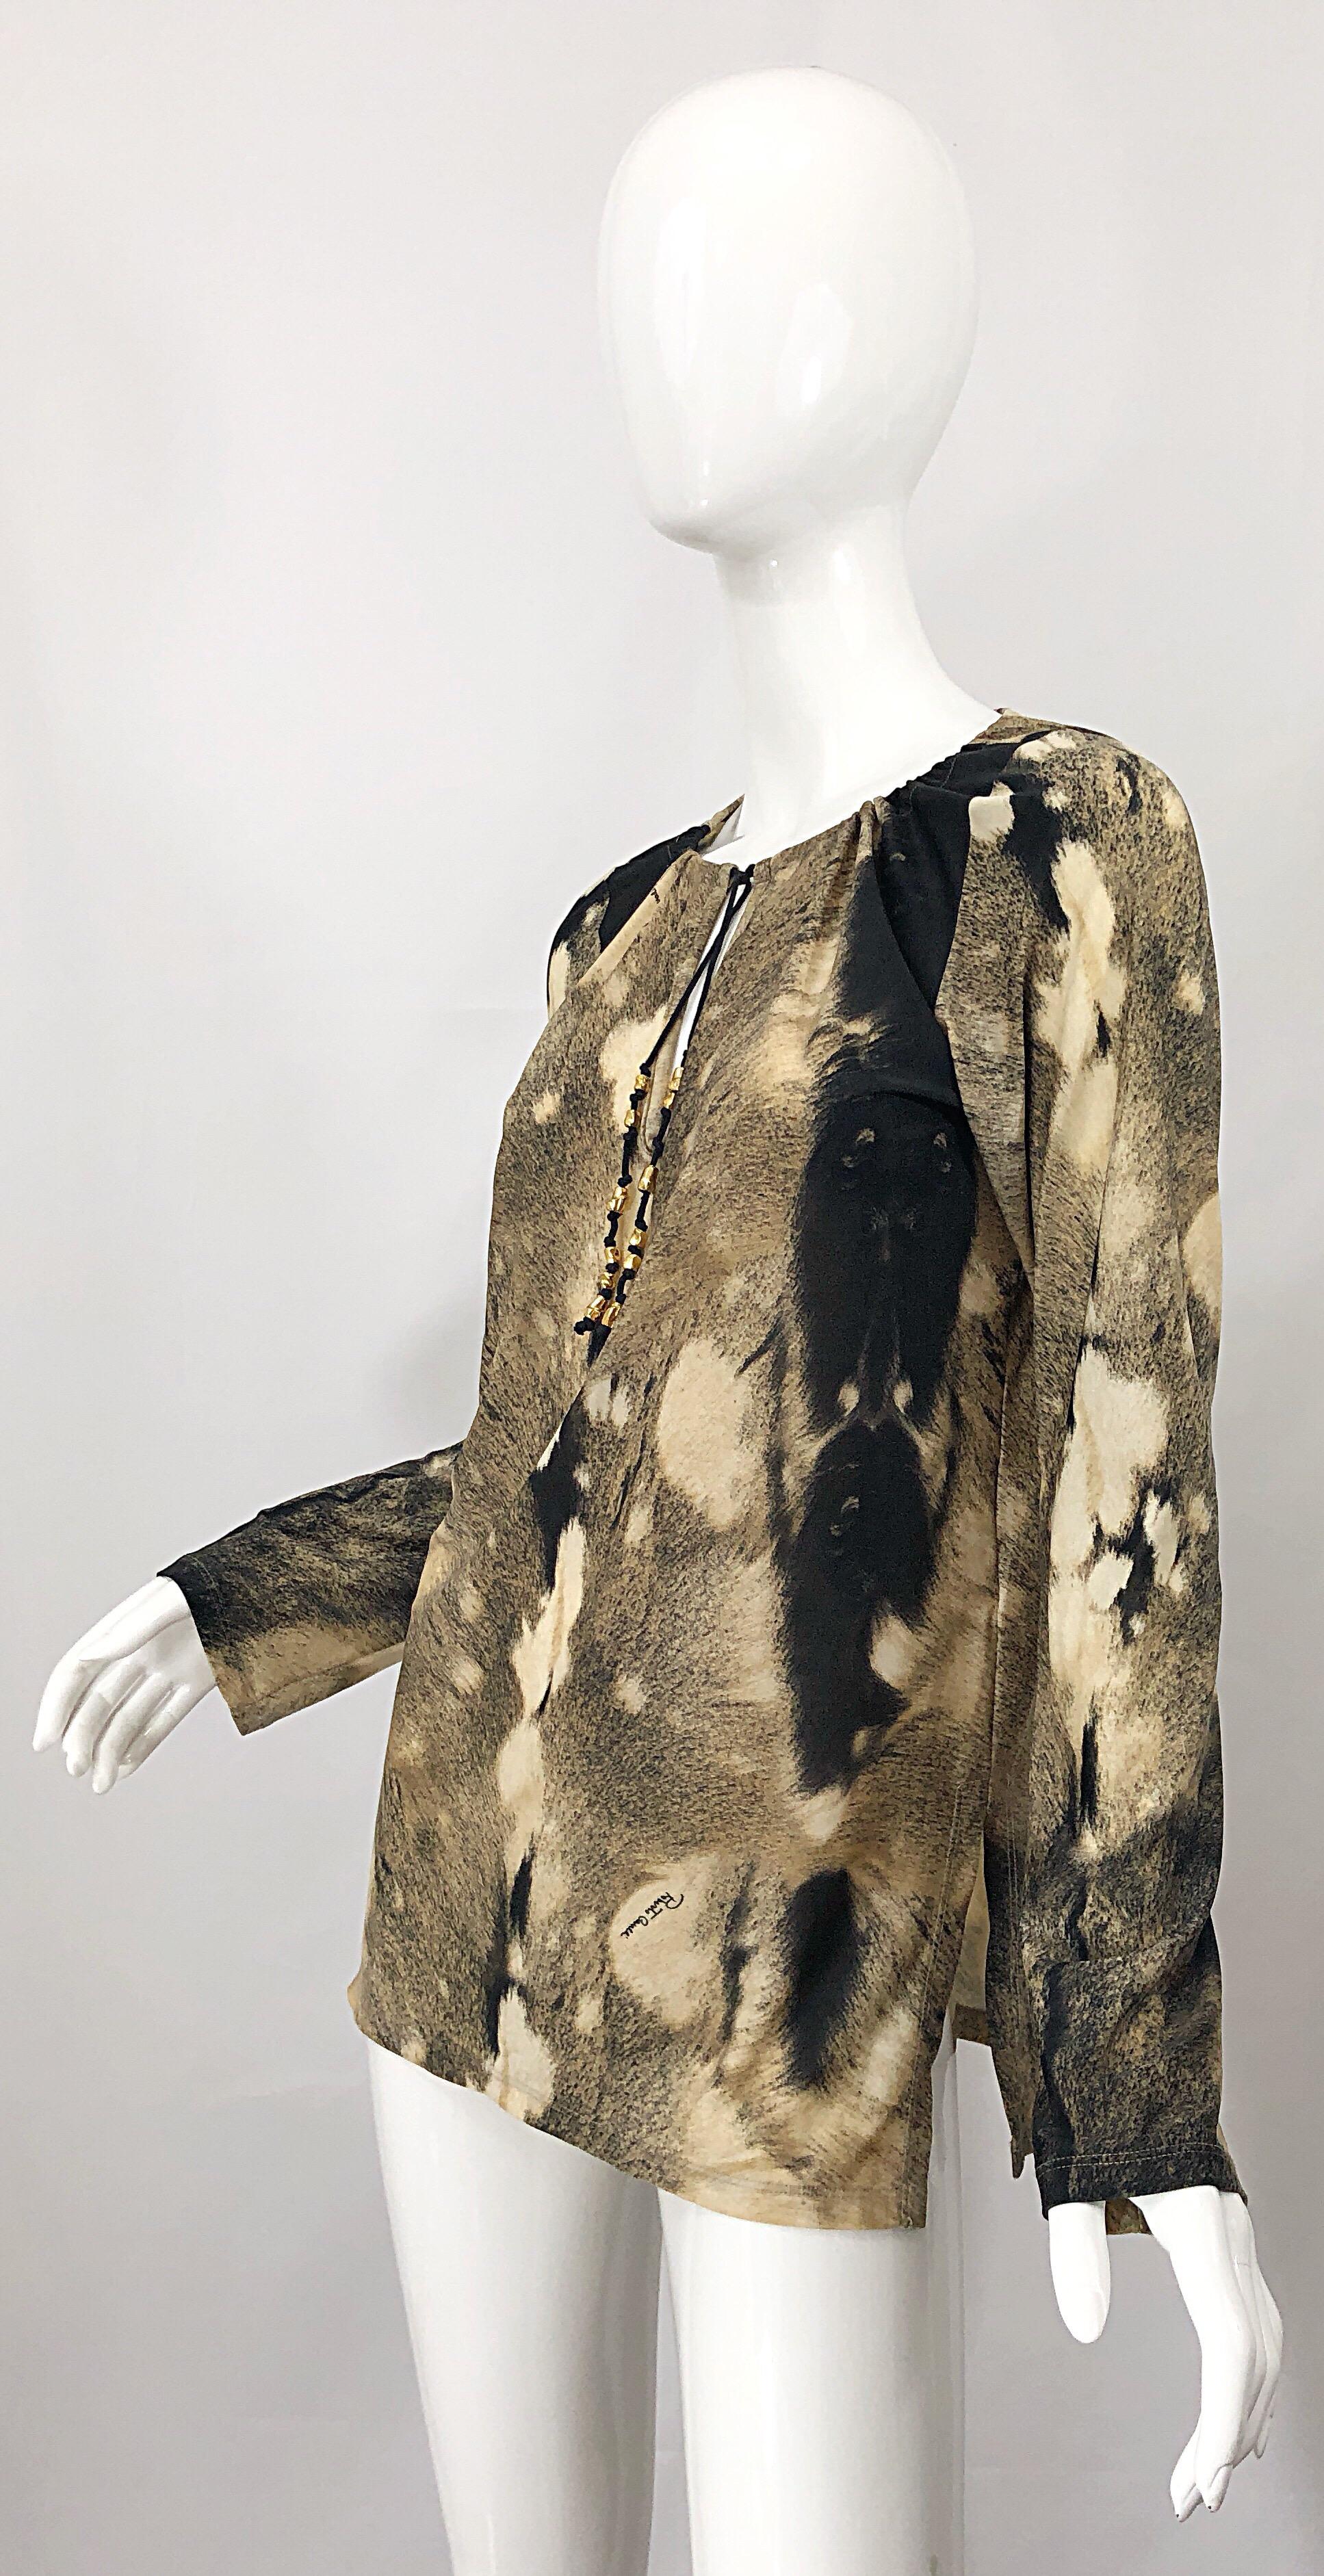 Roberto Cavalli Trompe L'Oeil Faux Fur Print Brown Beaded Jersey Tunic 90s Shirt In Excellent Condition For Sale In San Diego, CA